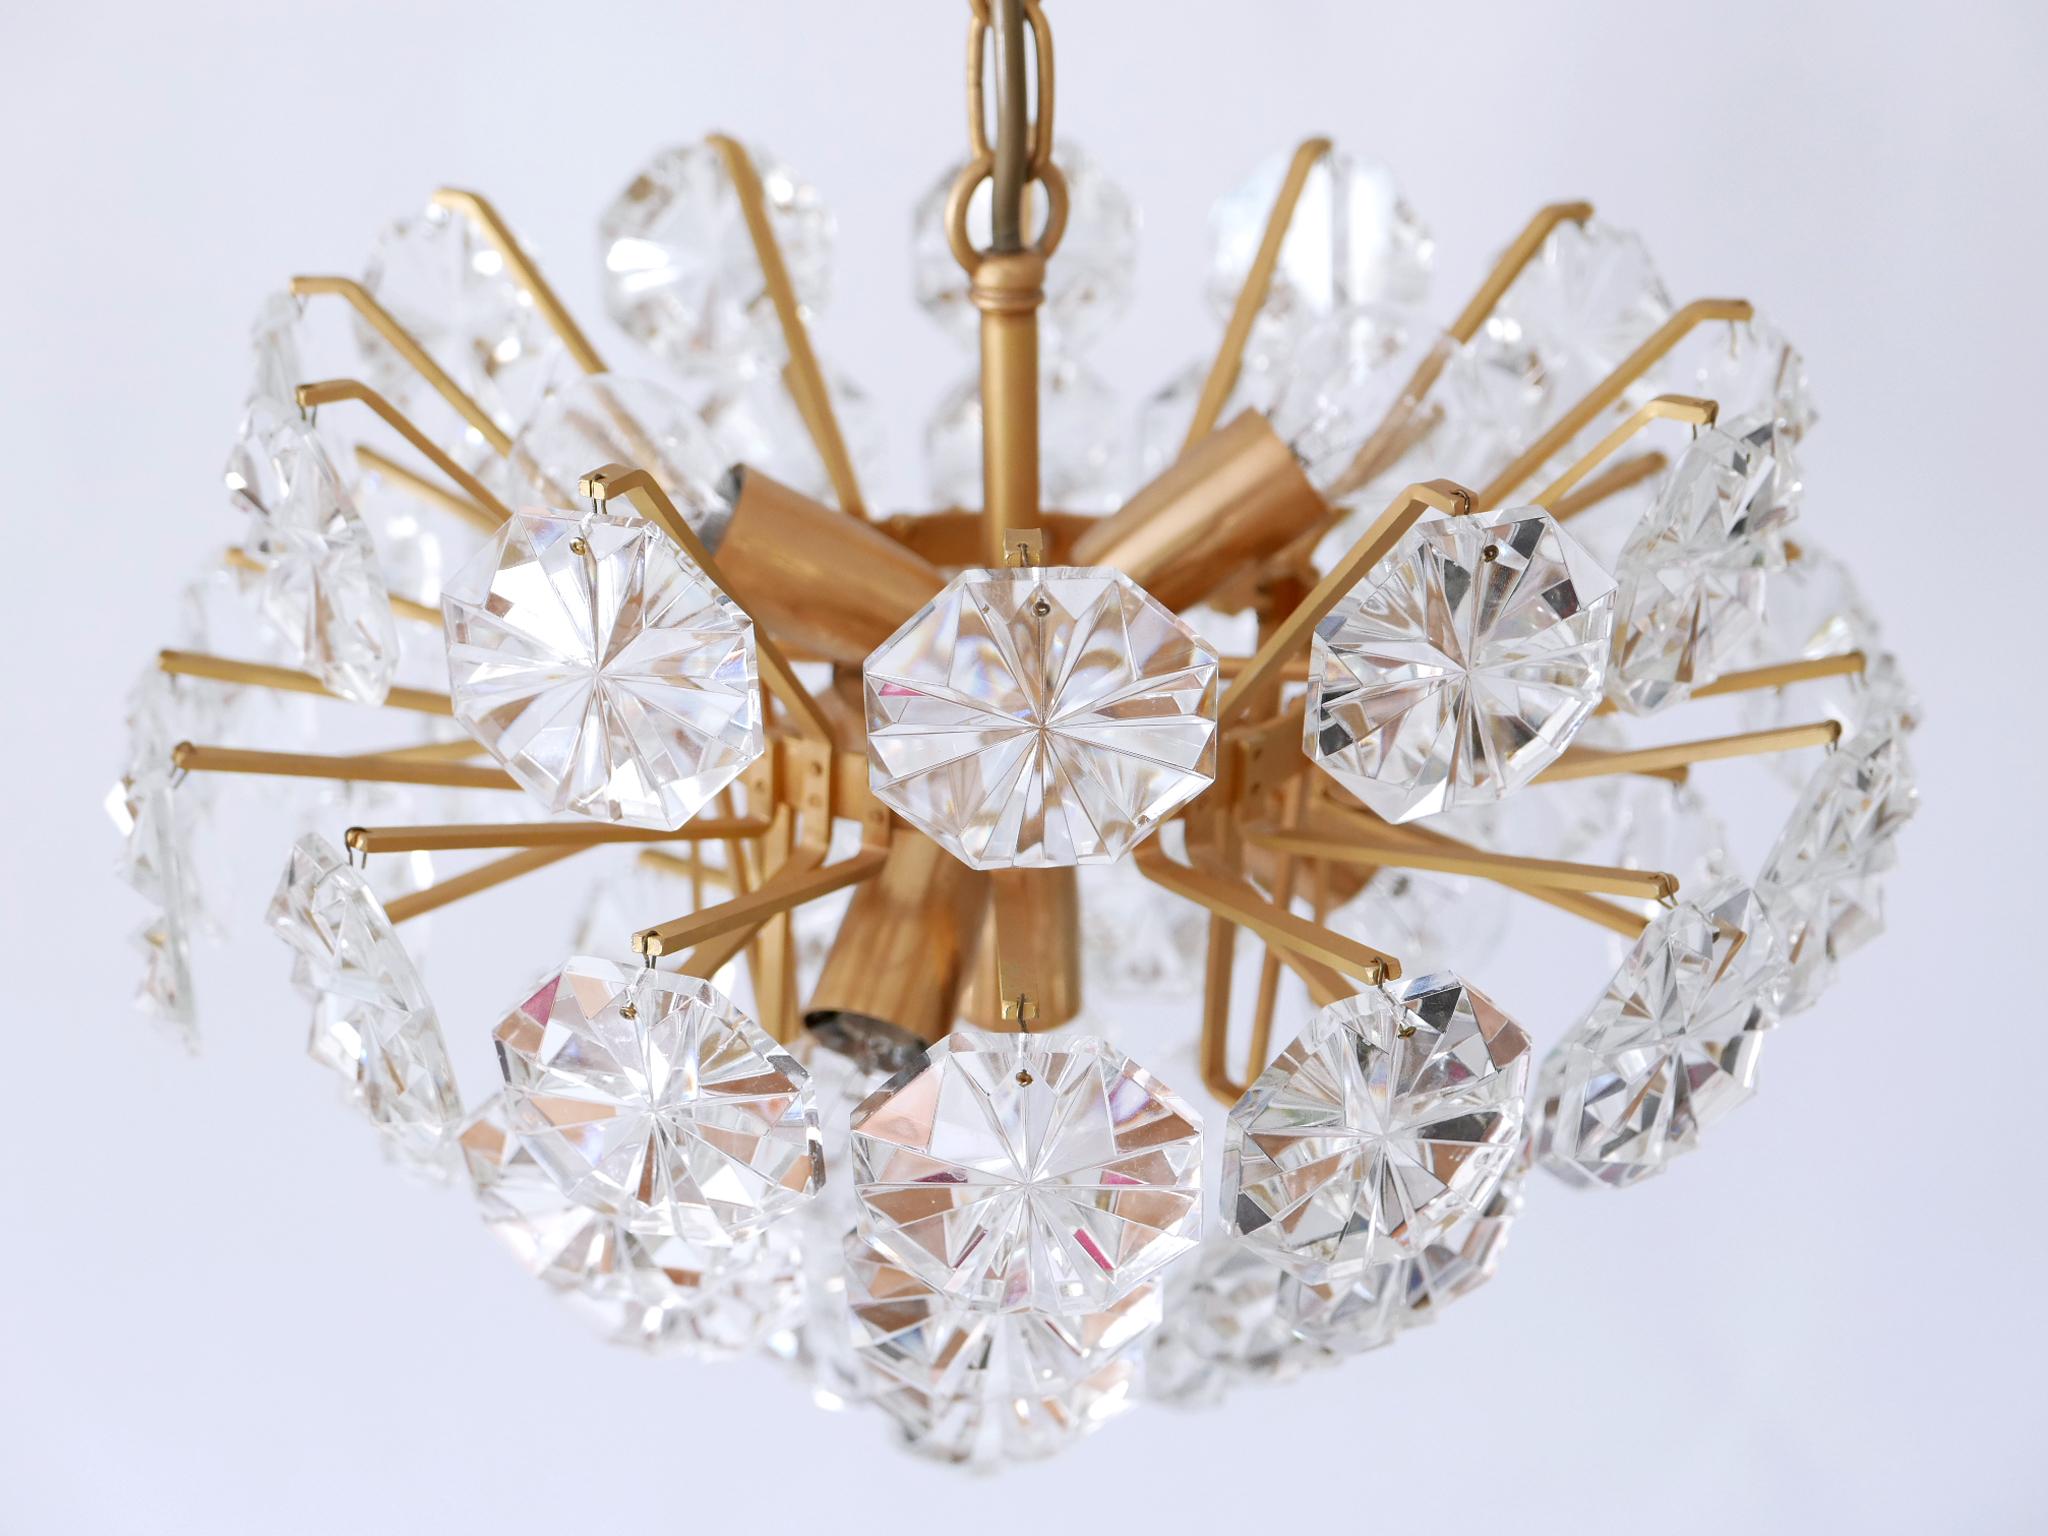 Elegant Mid Century Modern Crystal Chandelier by Christoph Palme Germany 1970s For Sale 5